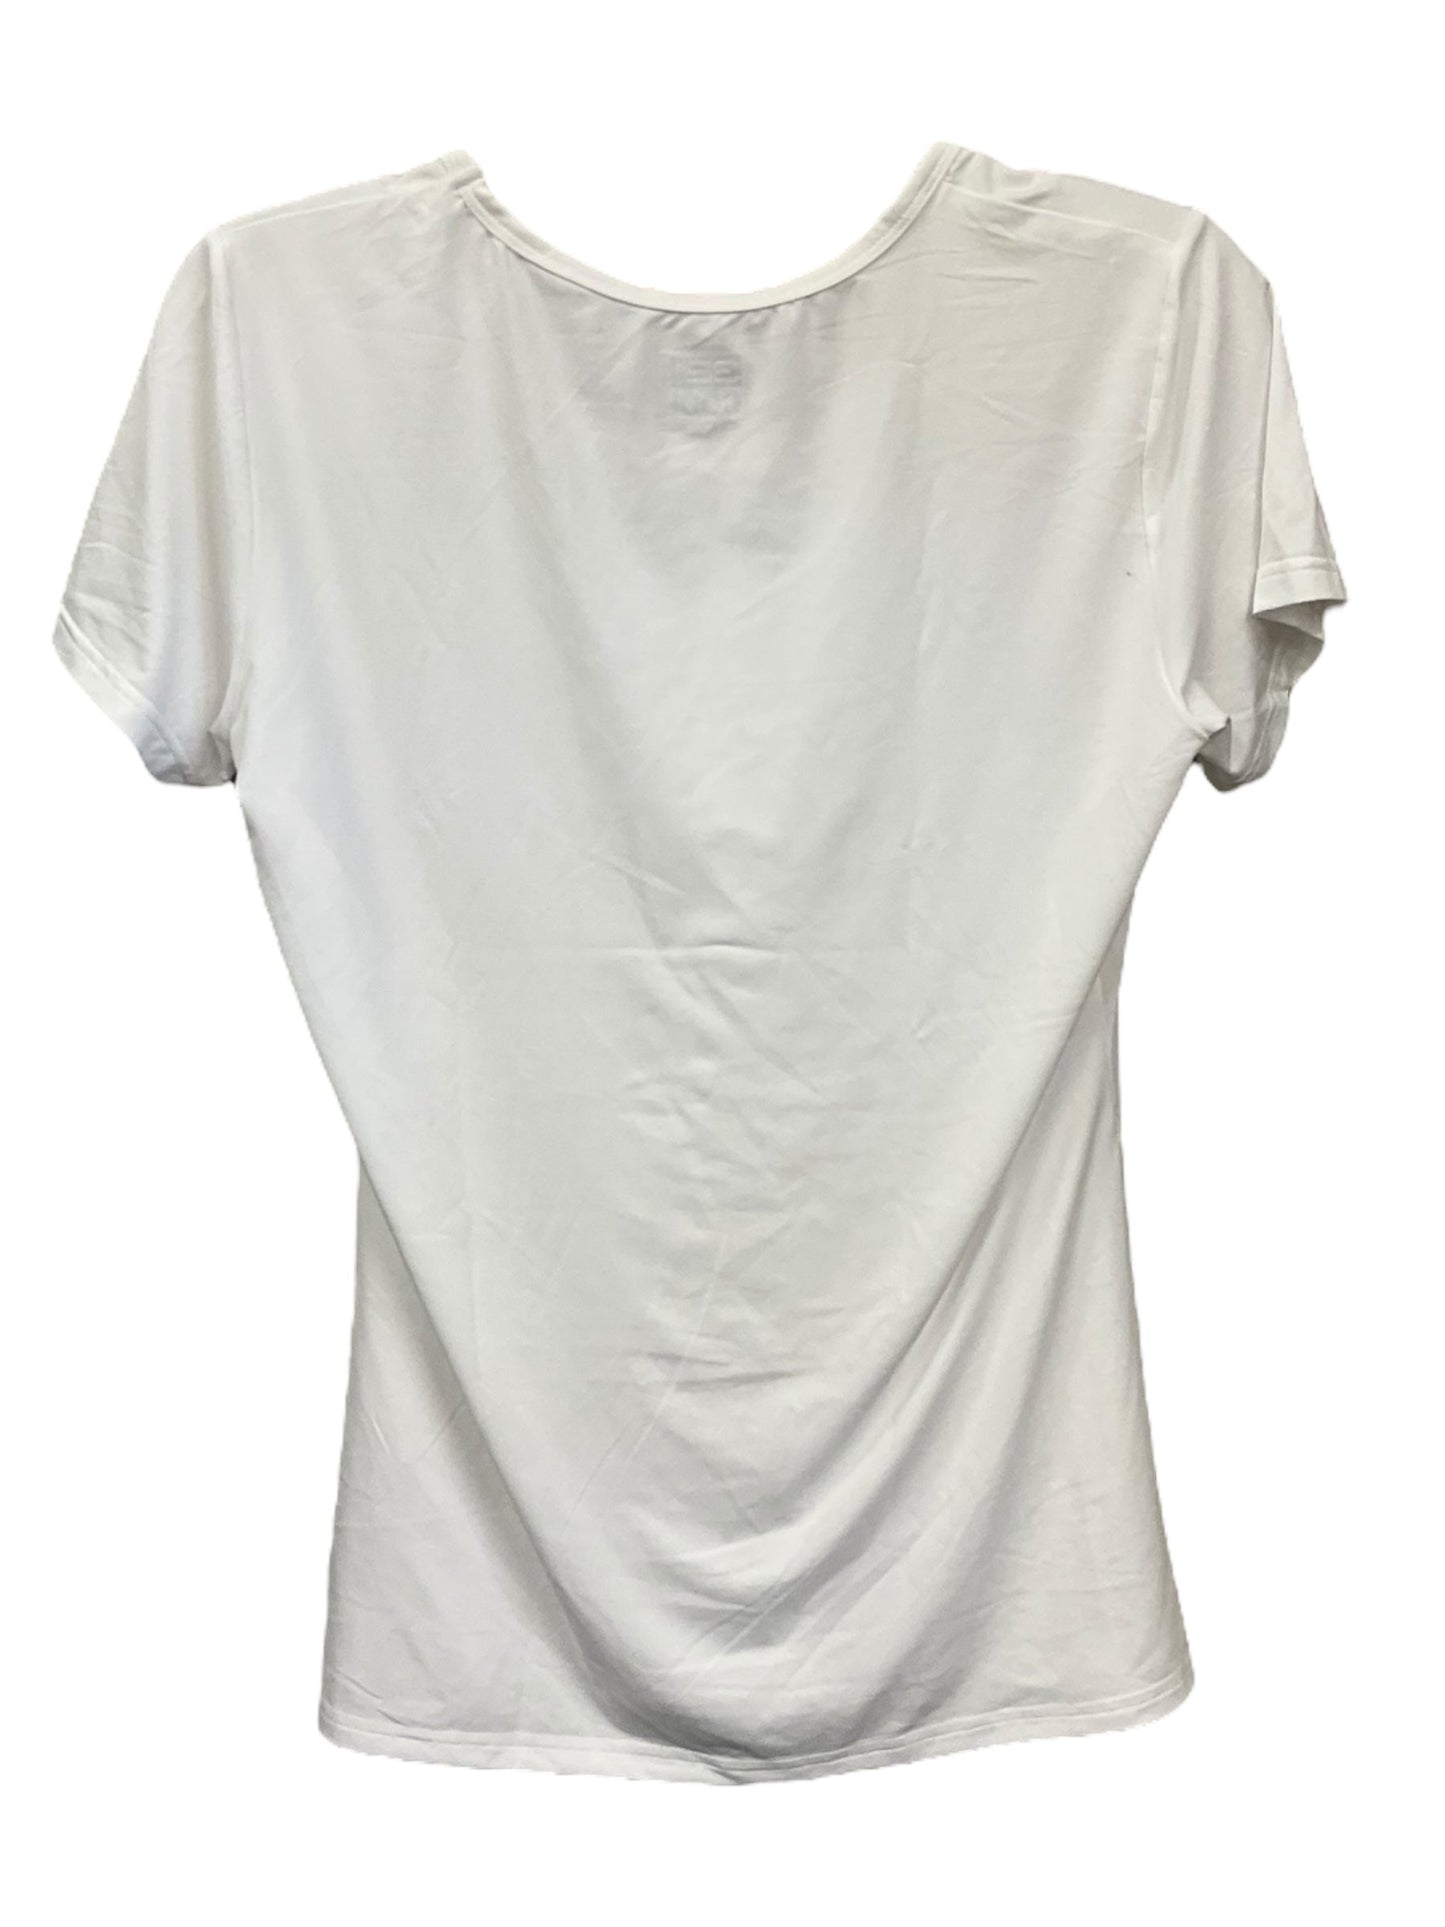 White Athletic Top Short Sleeve 32 Degrees, Size M